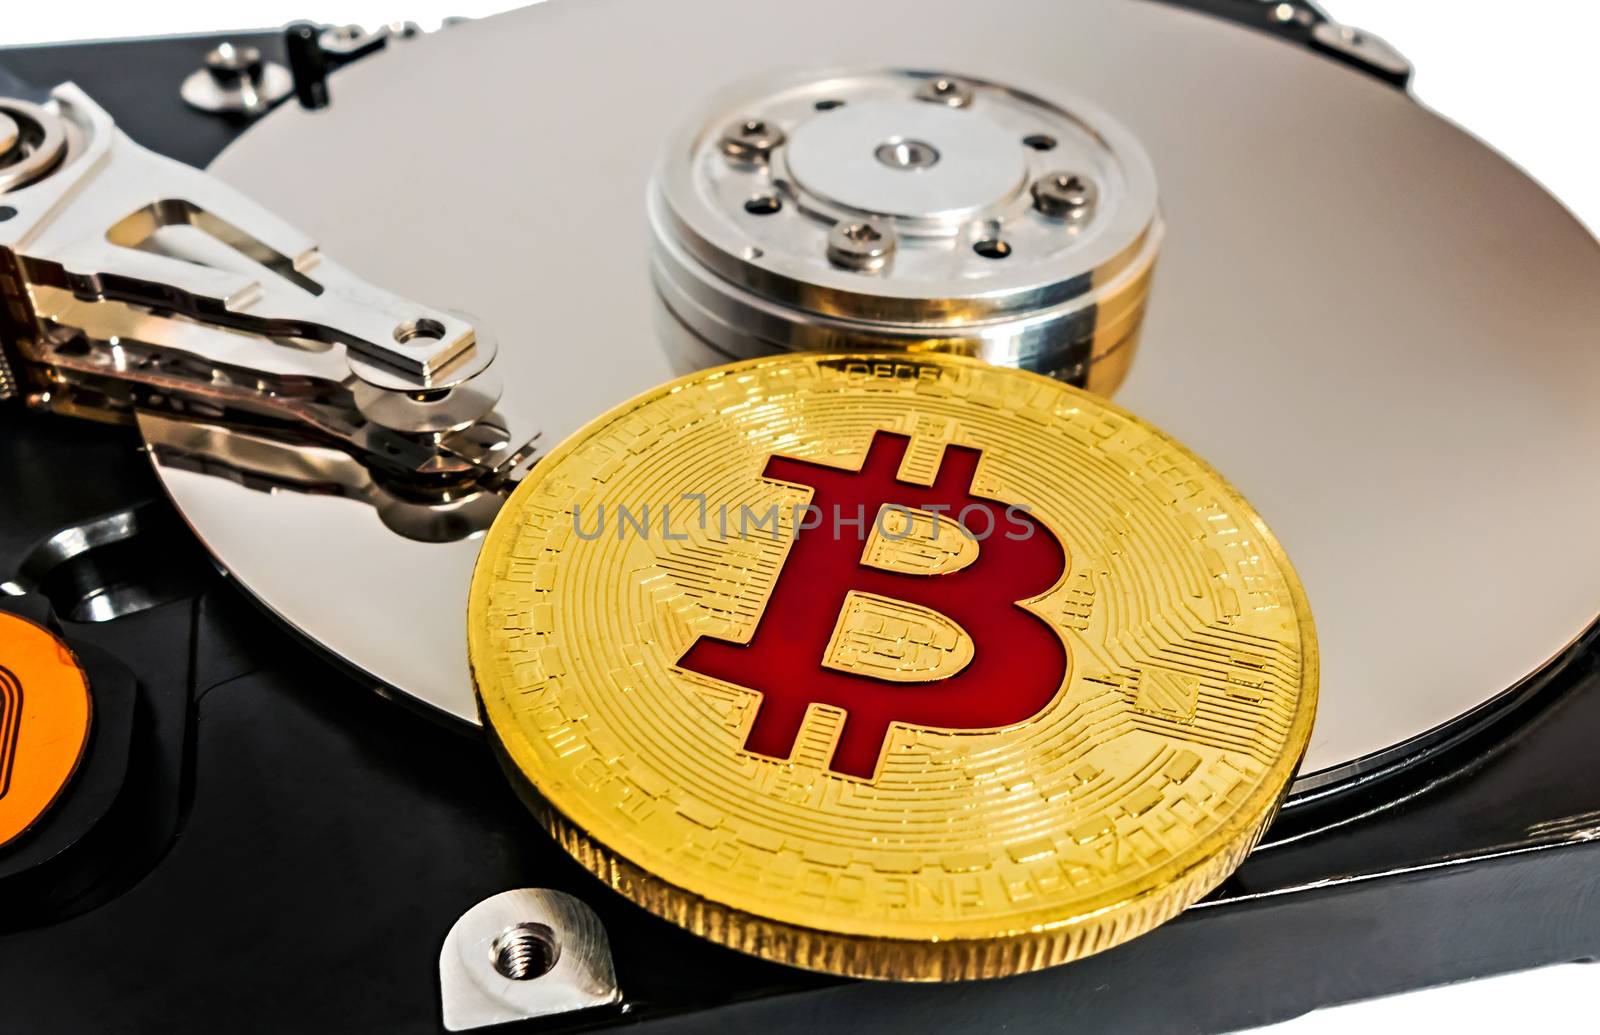 Physical Coin Cryptocurrency BTC Gold Plated Bitcoin in laptop hard disk server network concept wallet. Crypto currency blockchain Coin virtual money concept isolated on white background.